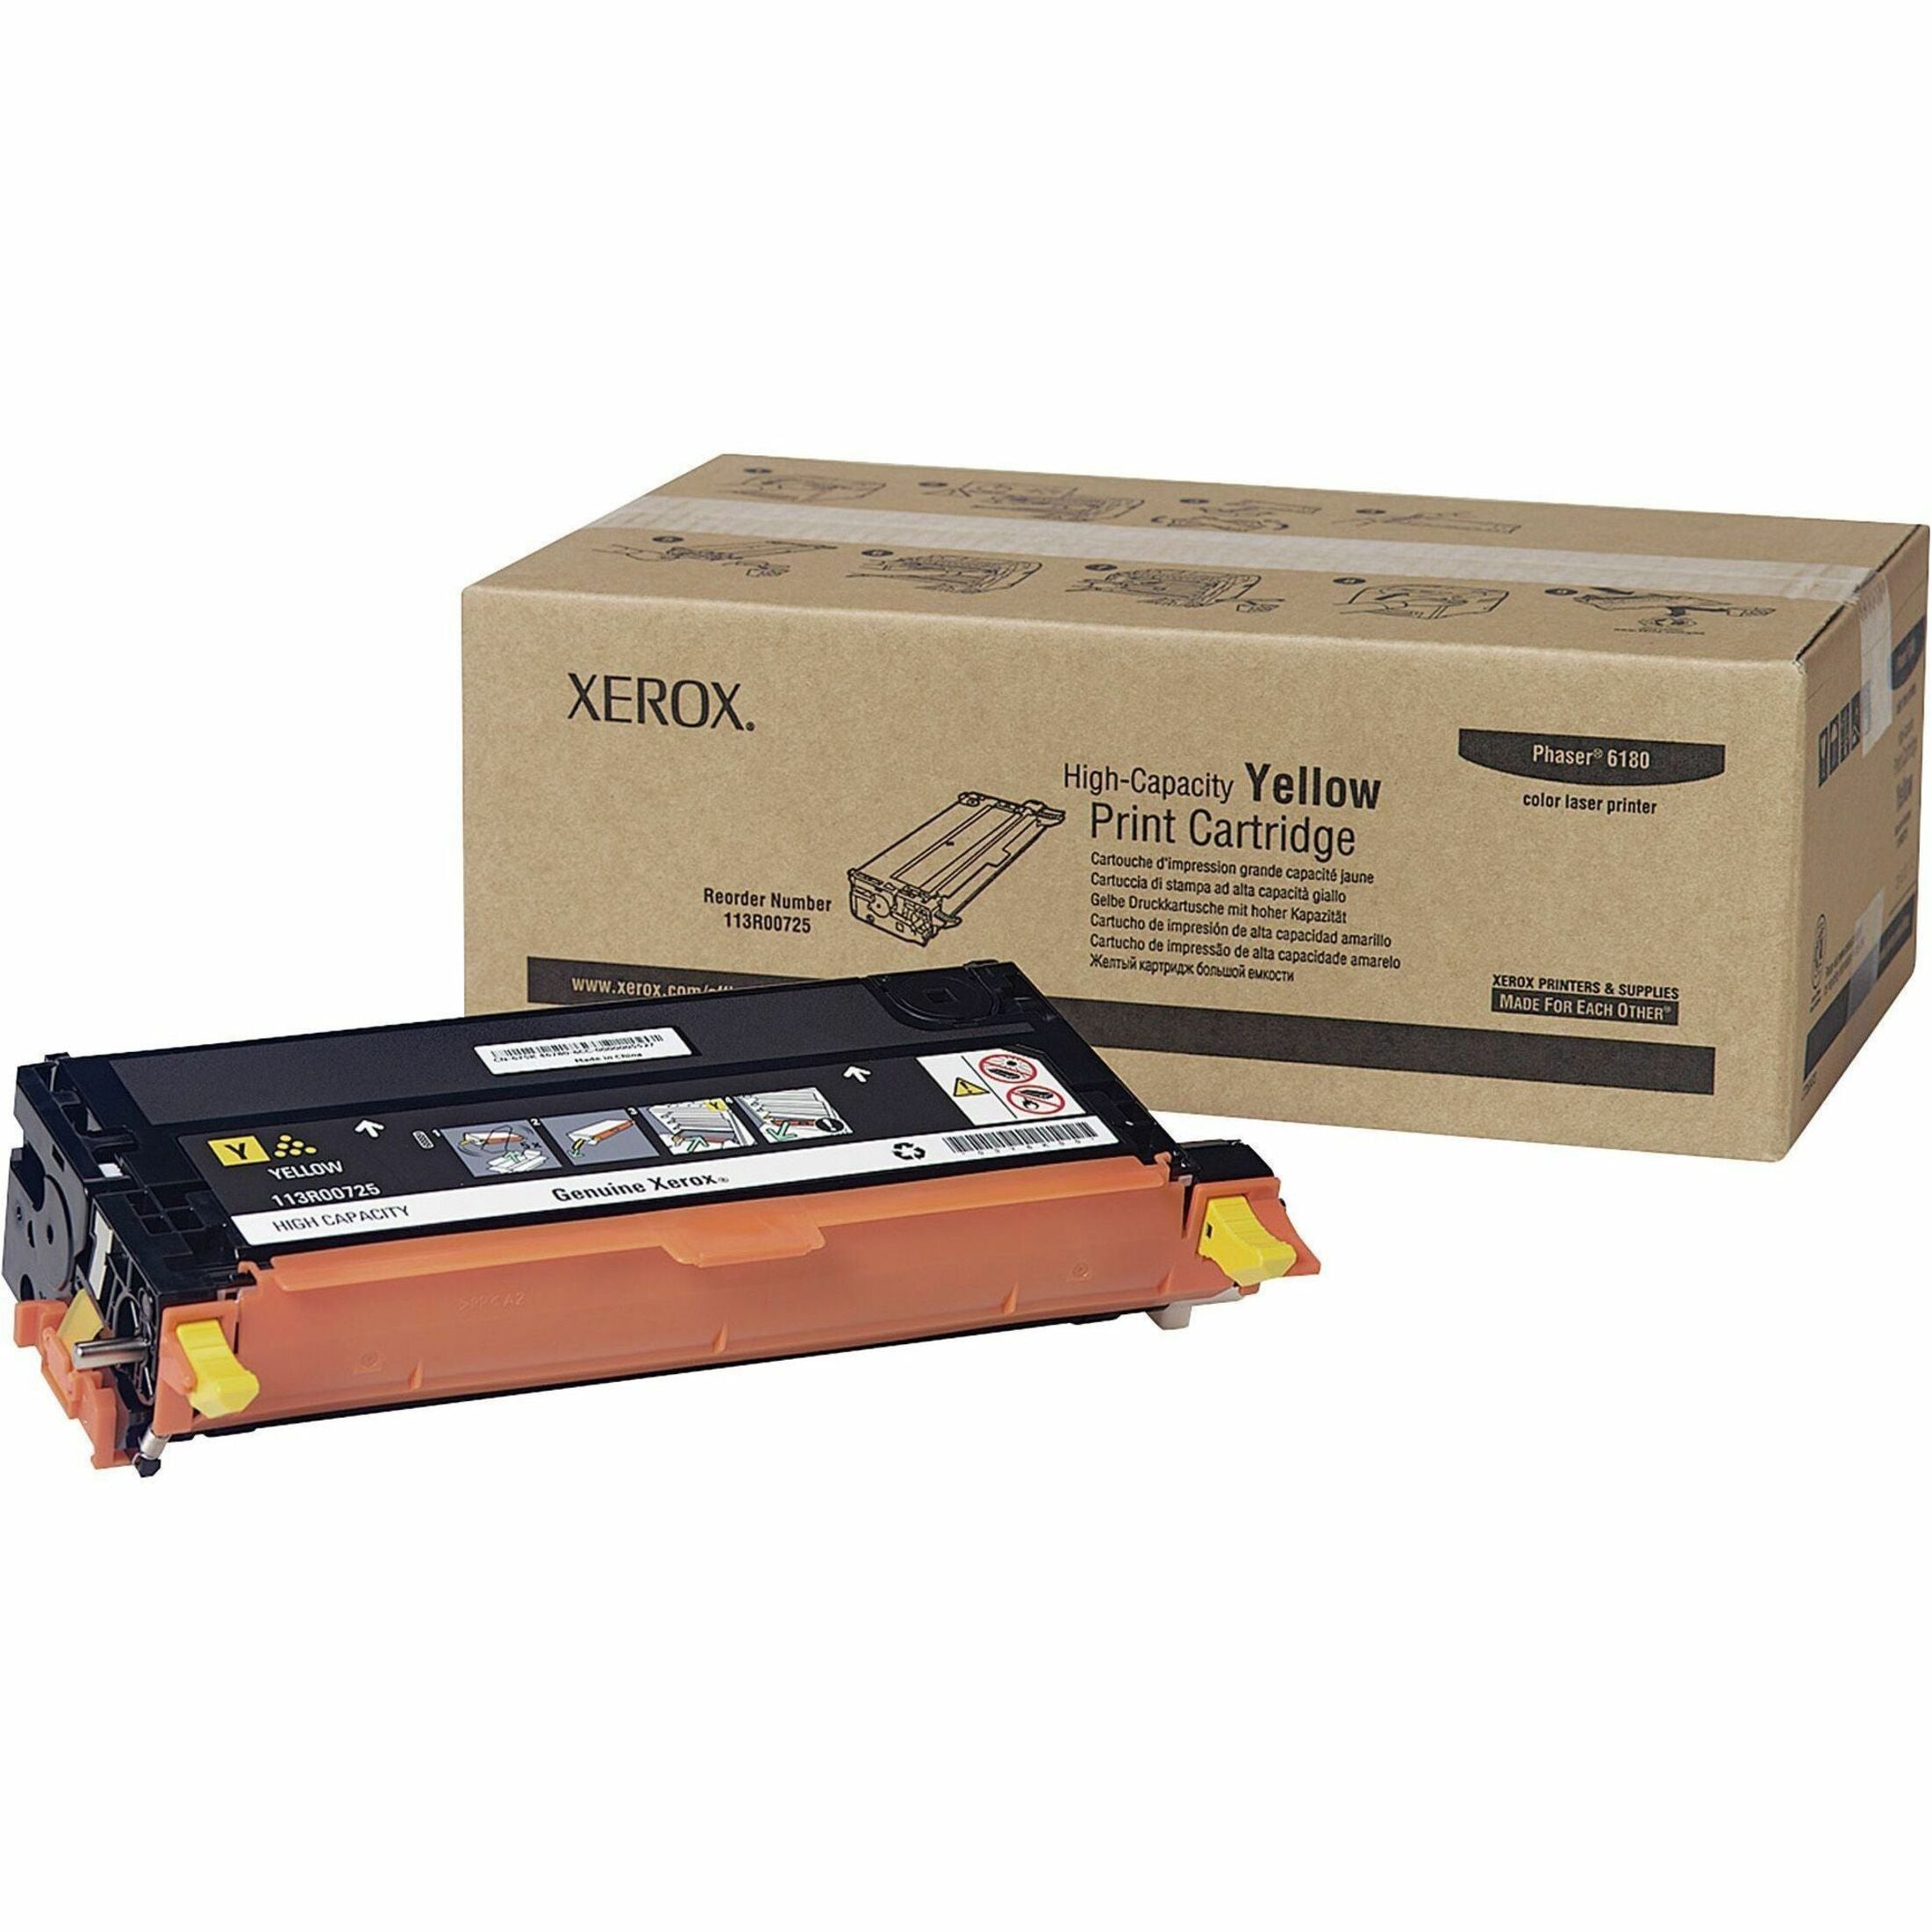 Xerox 113R00725 Phaser 6180 High Capacity Print Cartridge, Yellow, 6000 Pages Yield